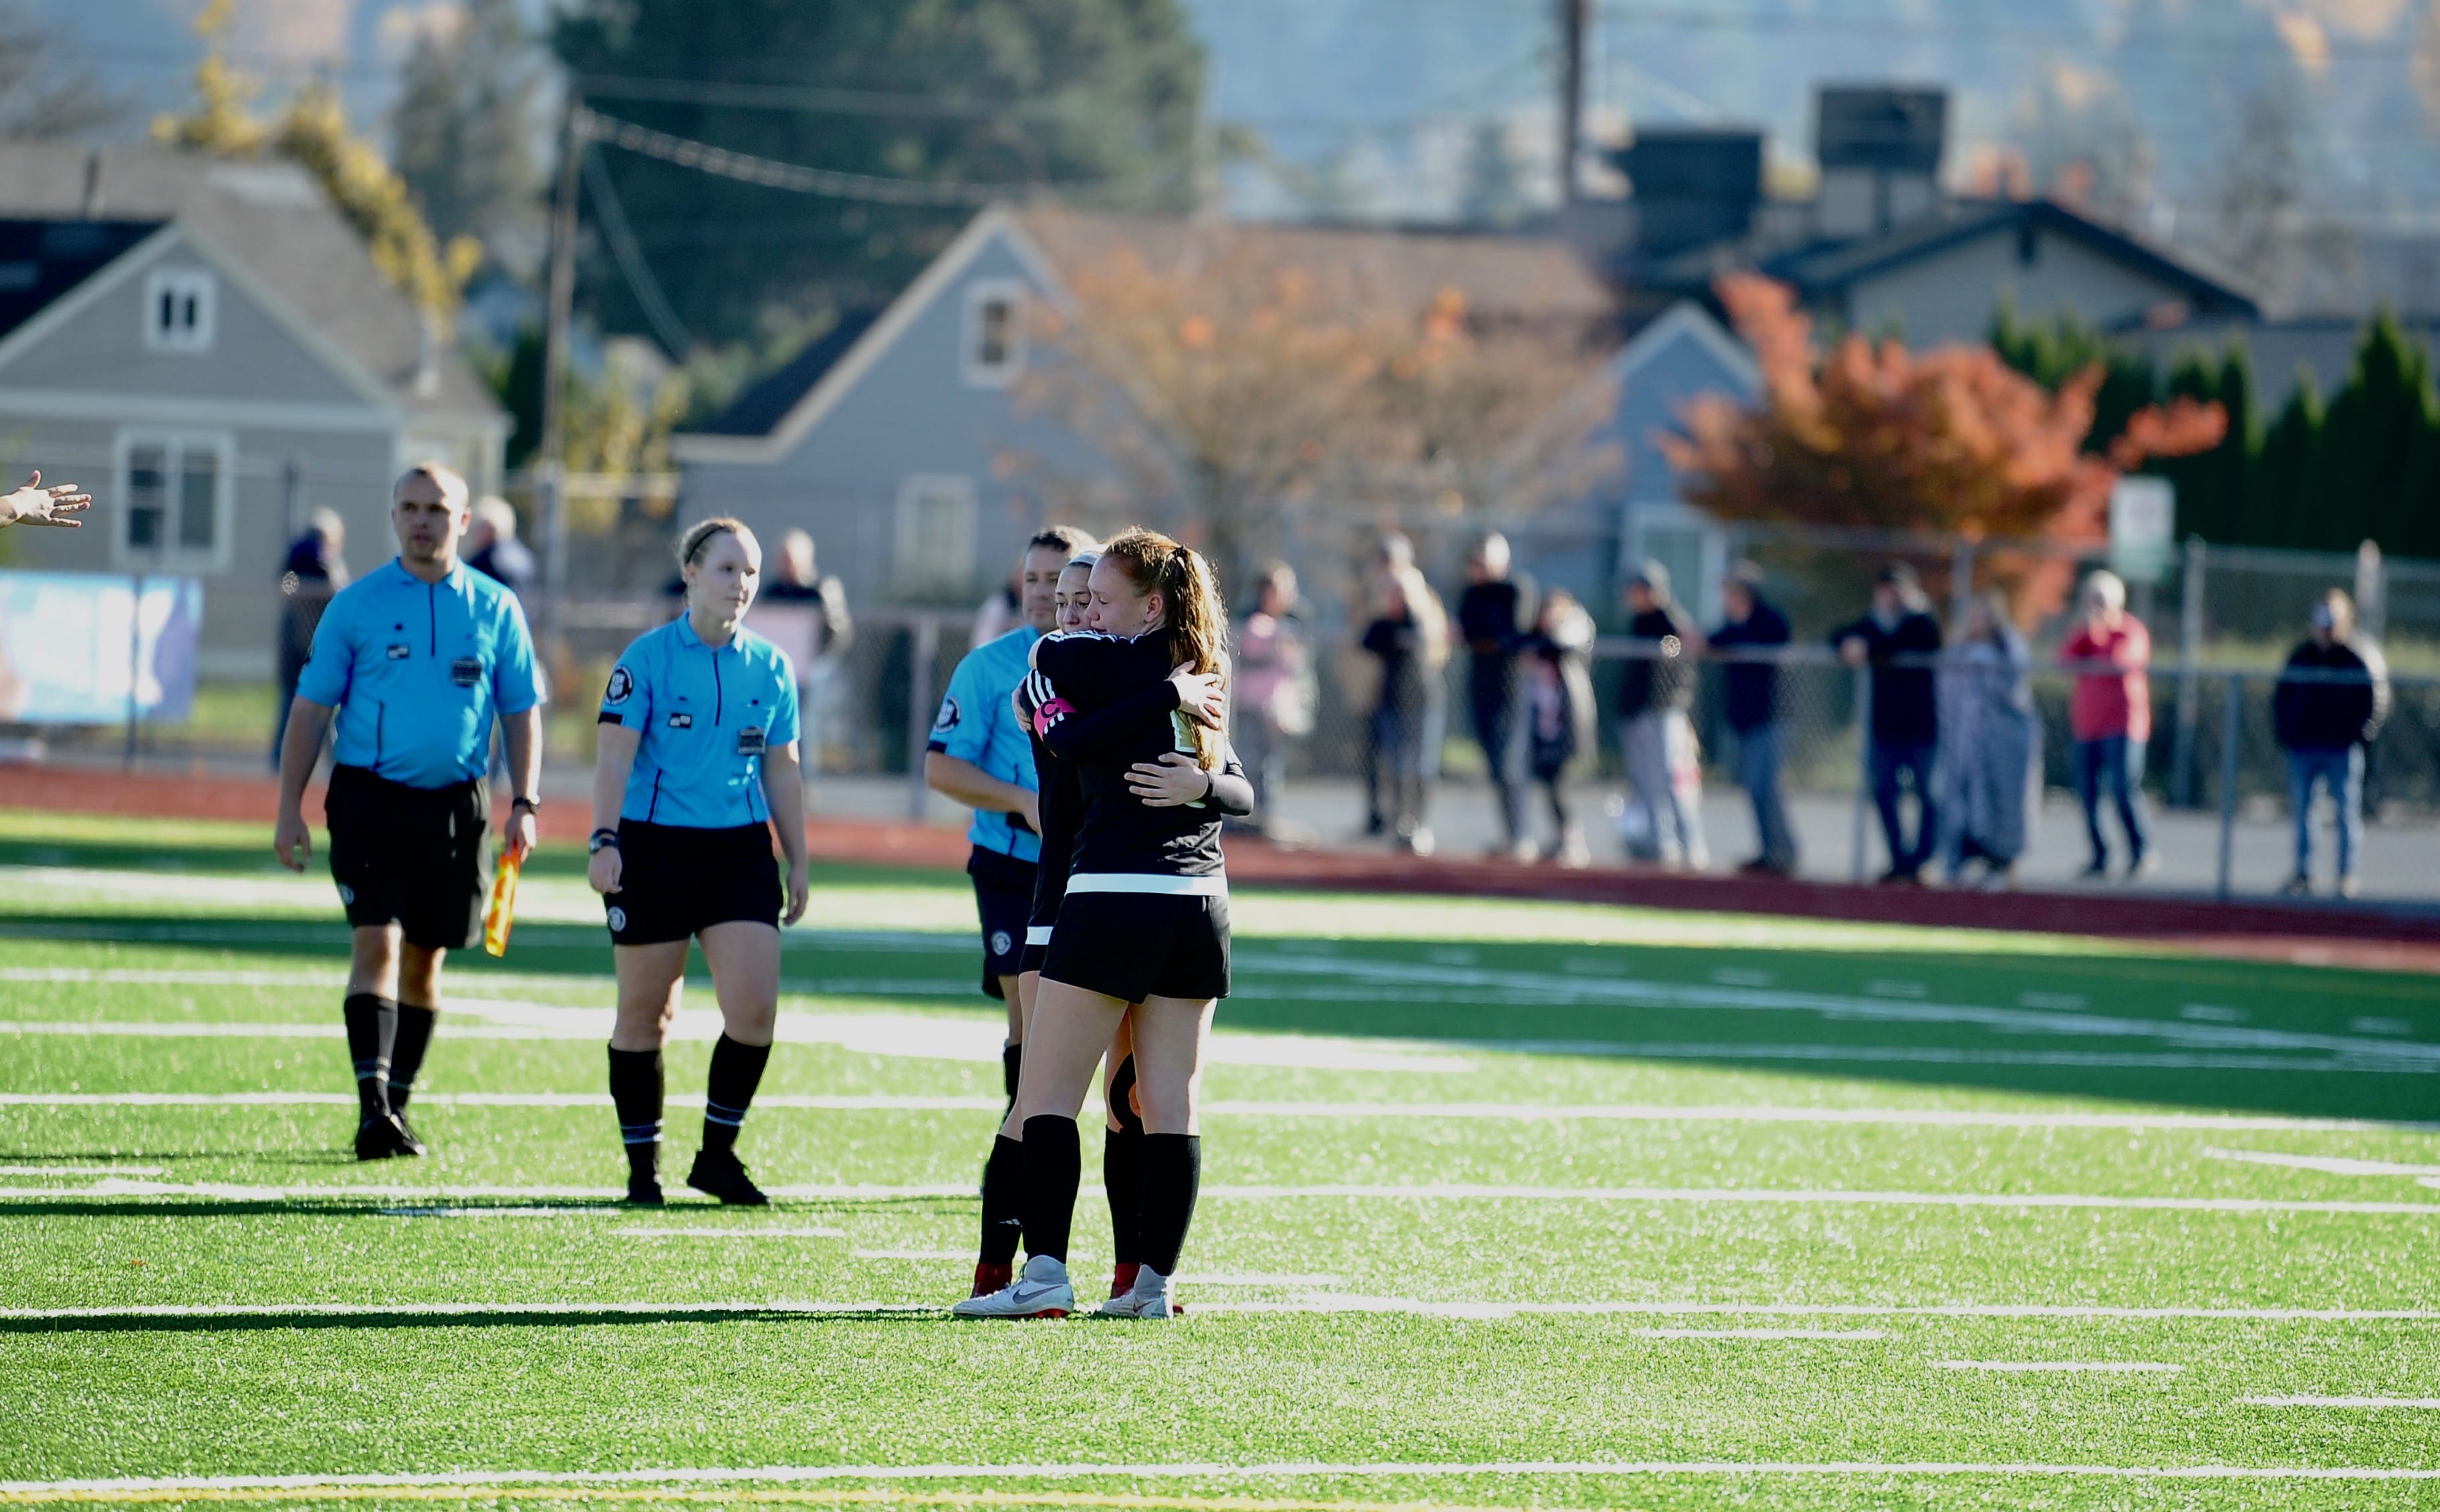 Prairie players embrace in the moments after the final whistle, marking the end of their season after a 3-0 loss at Sparks Stadium in Puyallup on Saturday, Nov. 17, 2018.